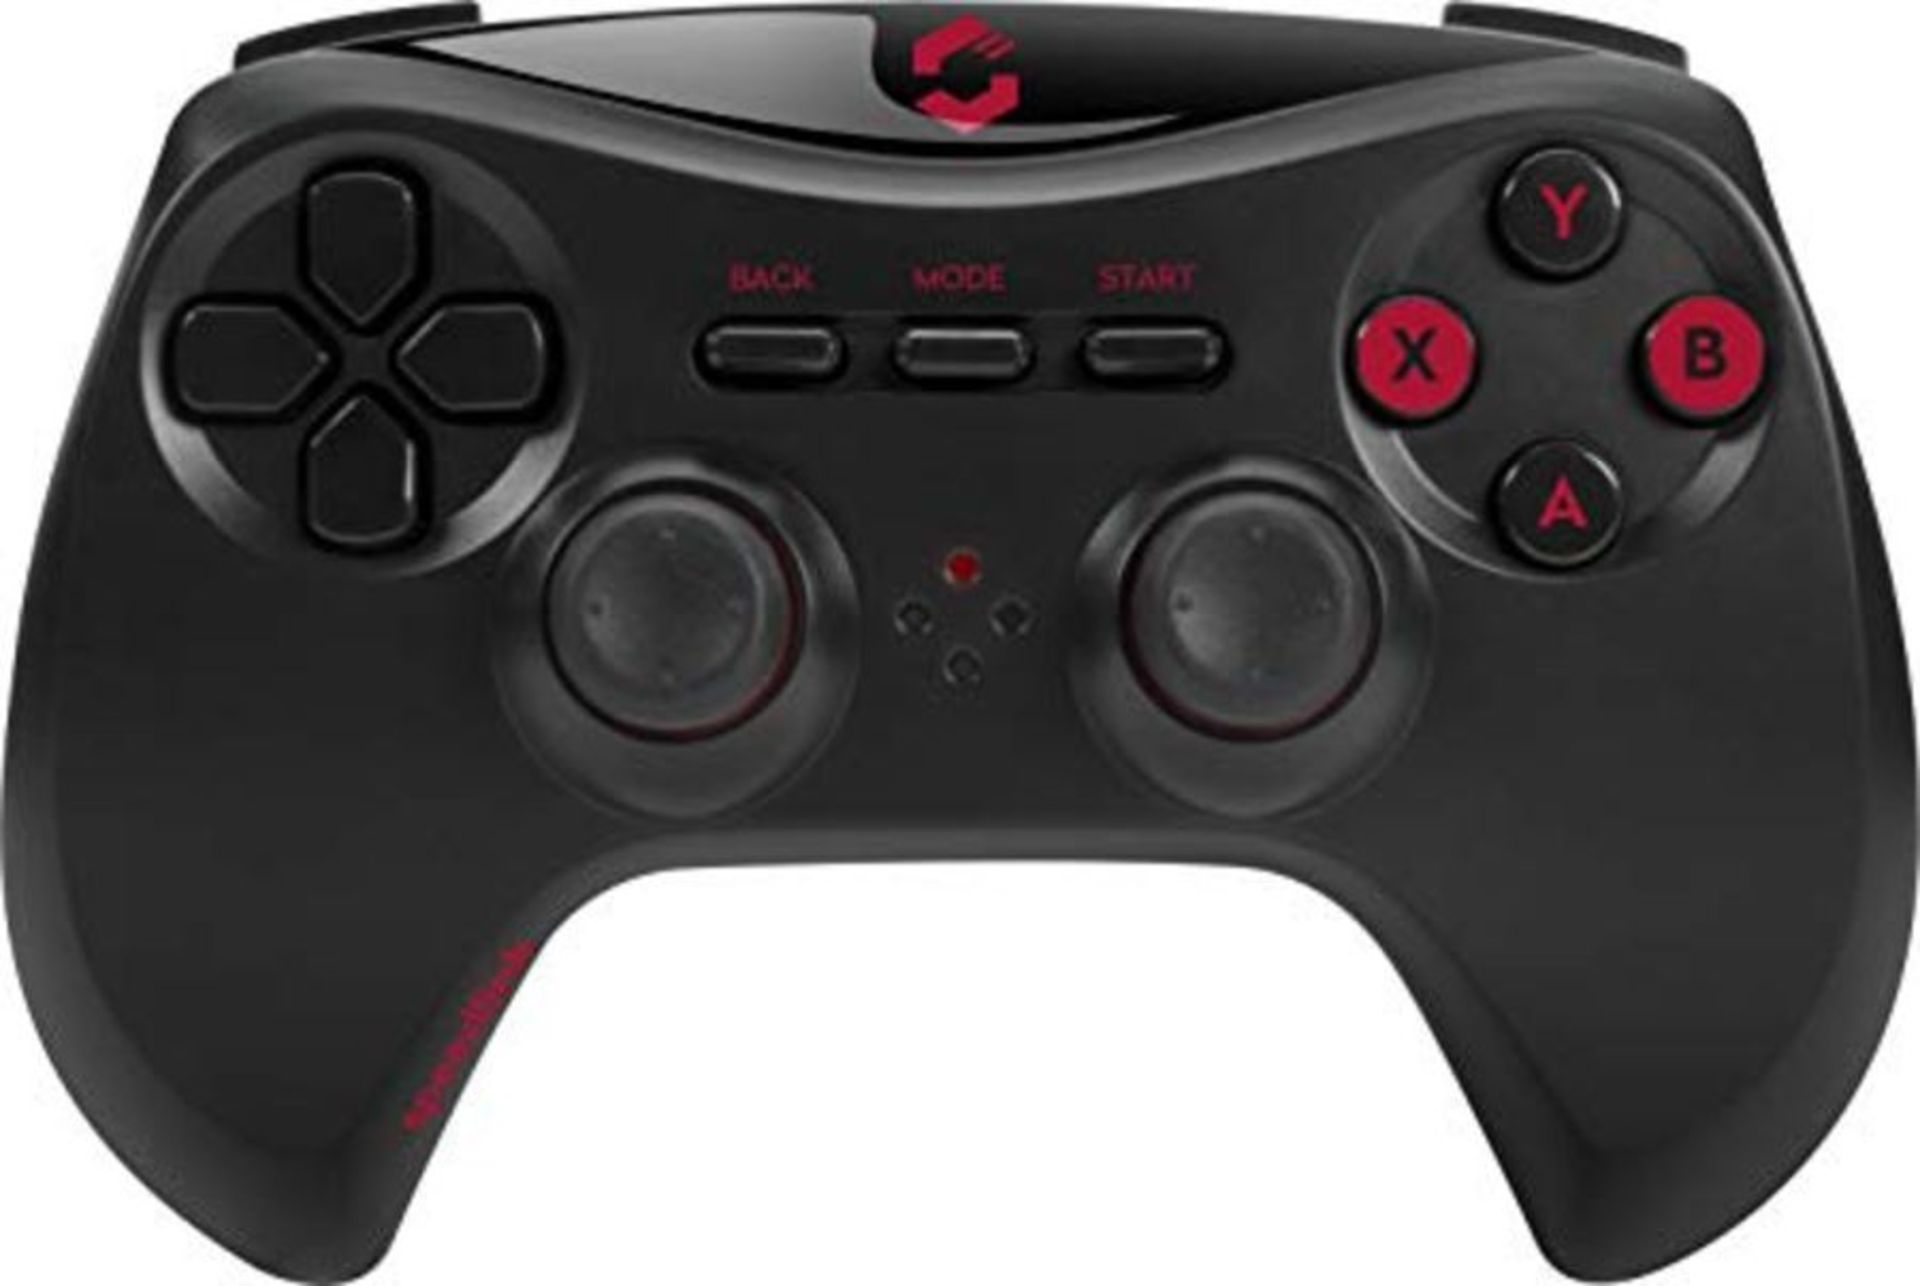 Speedlink STRIKE NX Gamepad for PC - Gaming controller - Highly realistic vibrations -